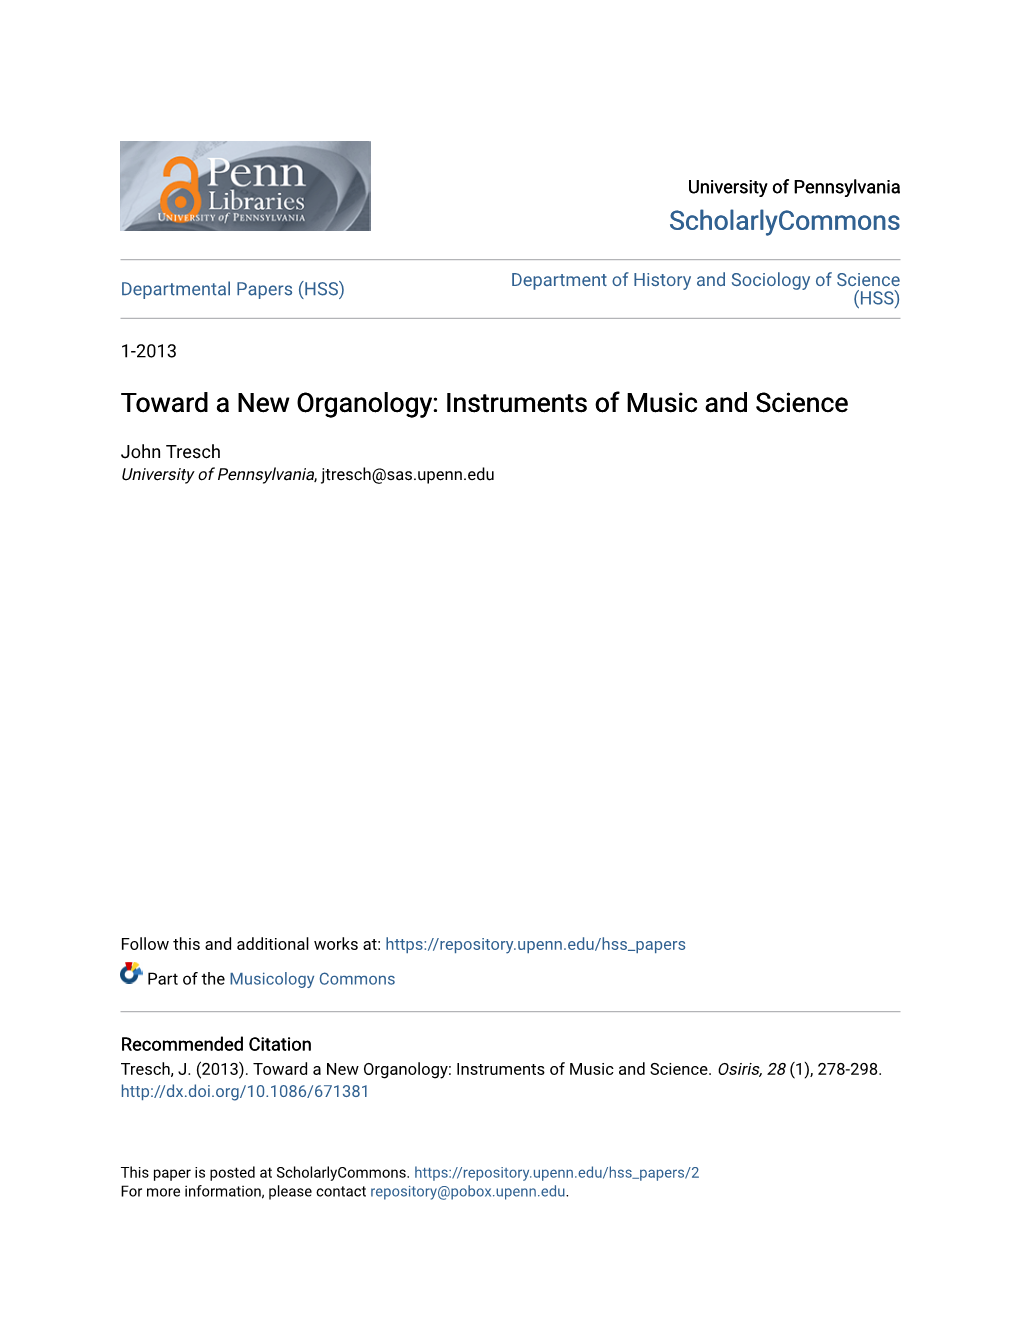 Toward a New Organology: Instruments of Music and Science